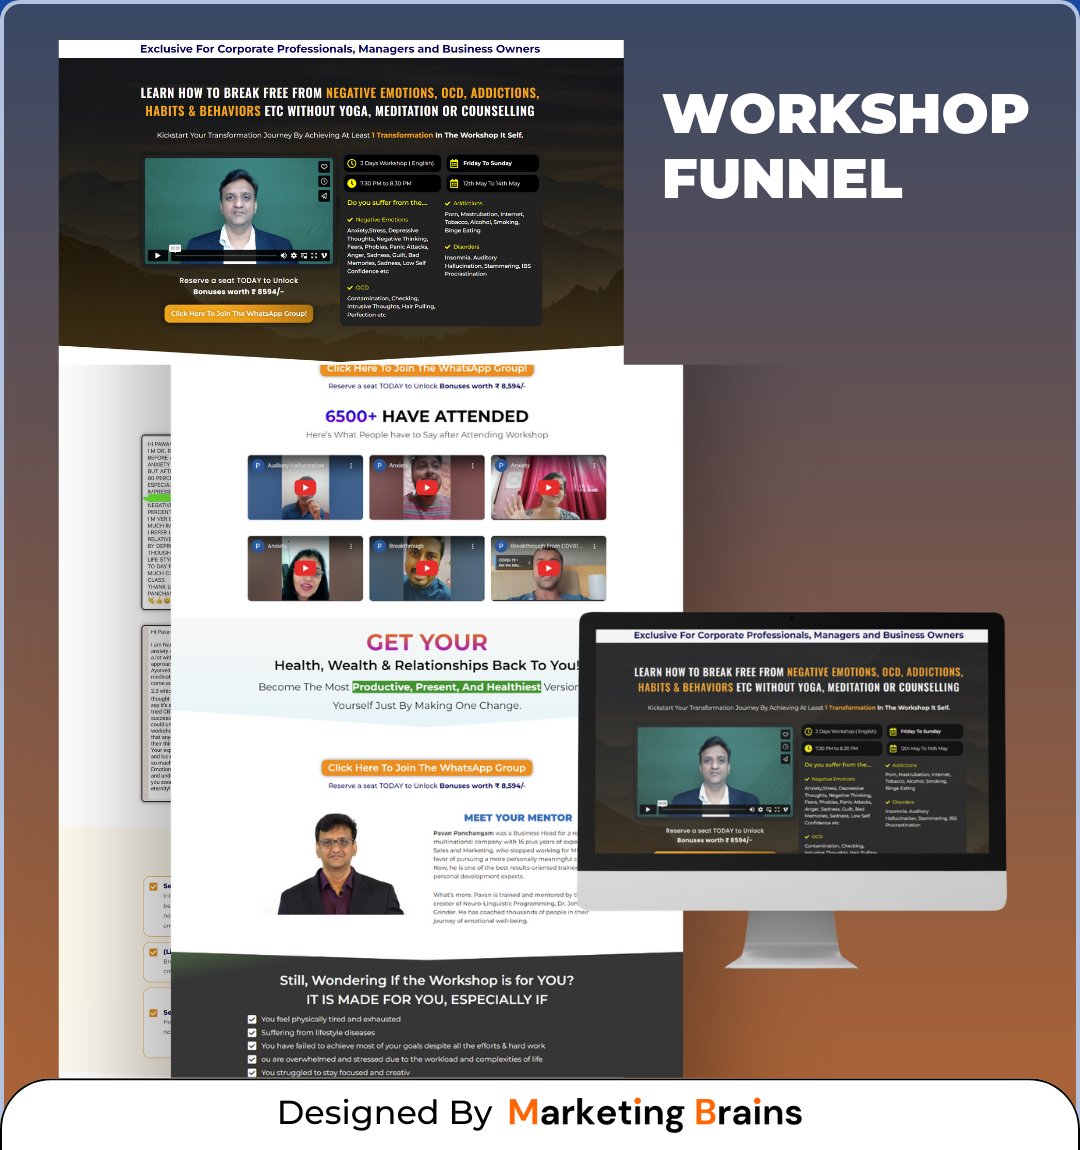 Step into the forefront of contemporary success!🔥

Unveiling our latest innovation: the Workshop Funnel. 

#digitalstrategy #trendsetting #funnelmarketing #marketingbrains #socialmedia